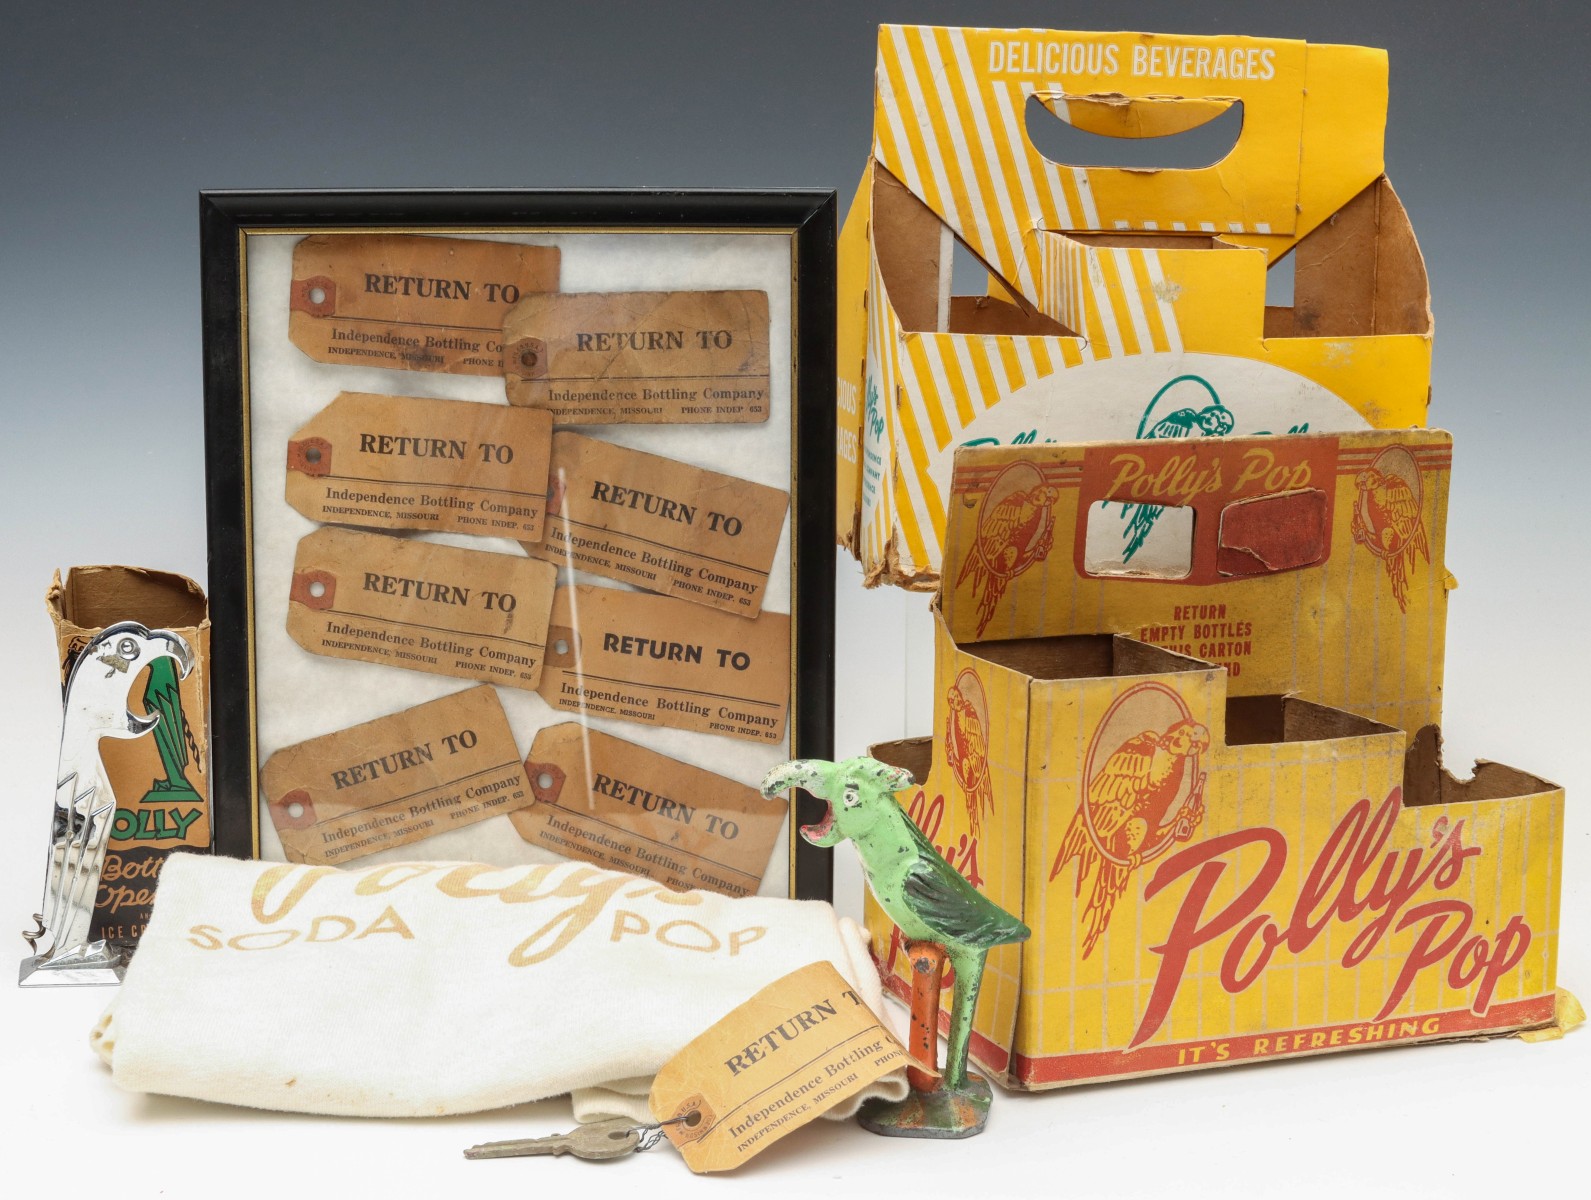 A COLLECTION OF VINTAGE POLLY'S POP ITEMS